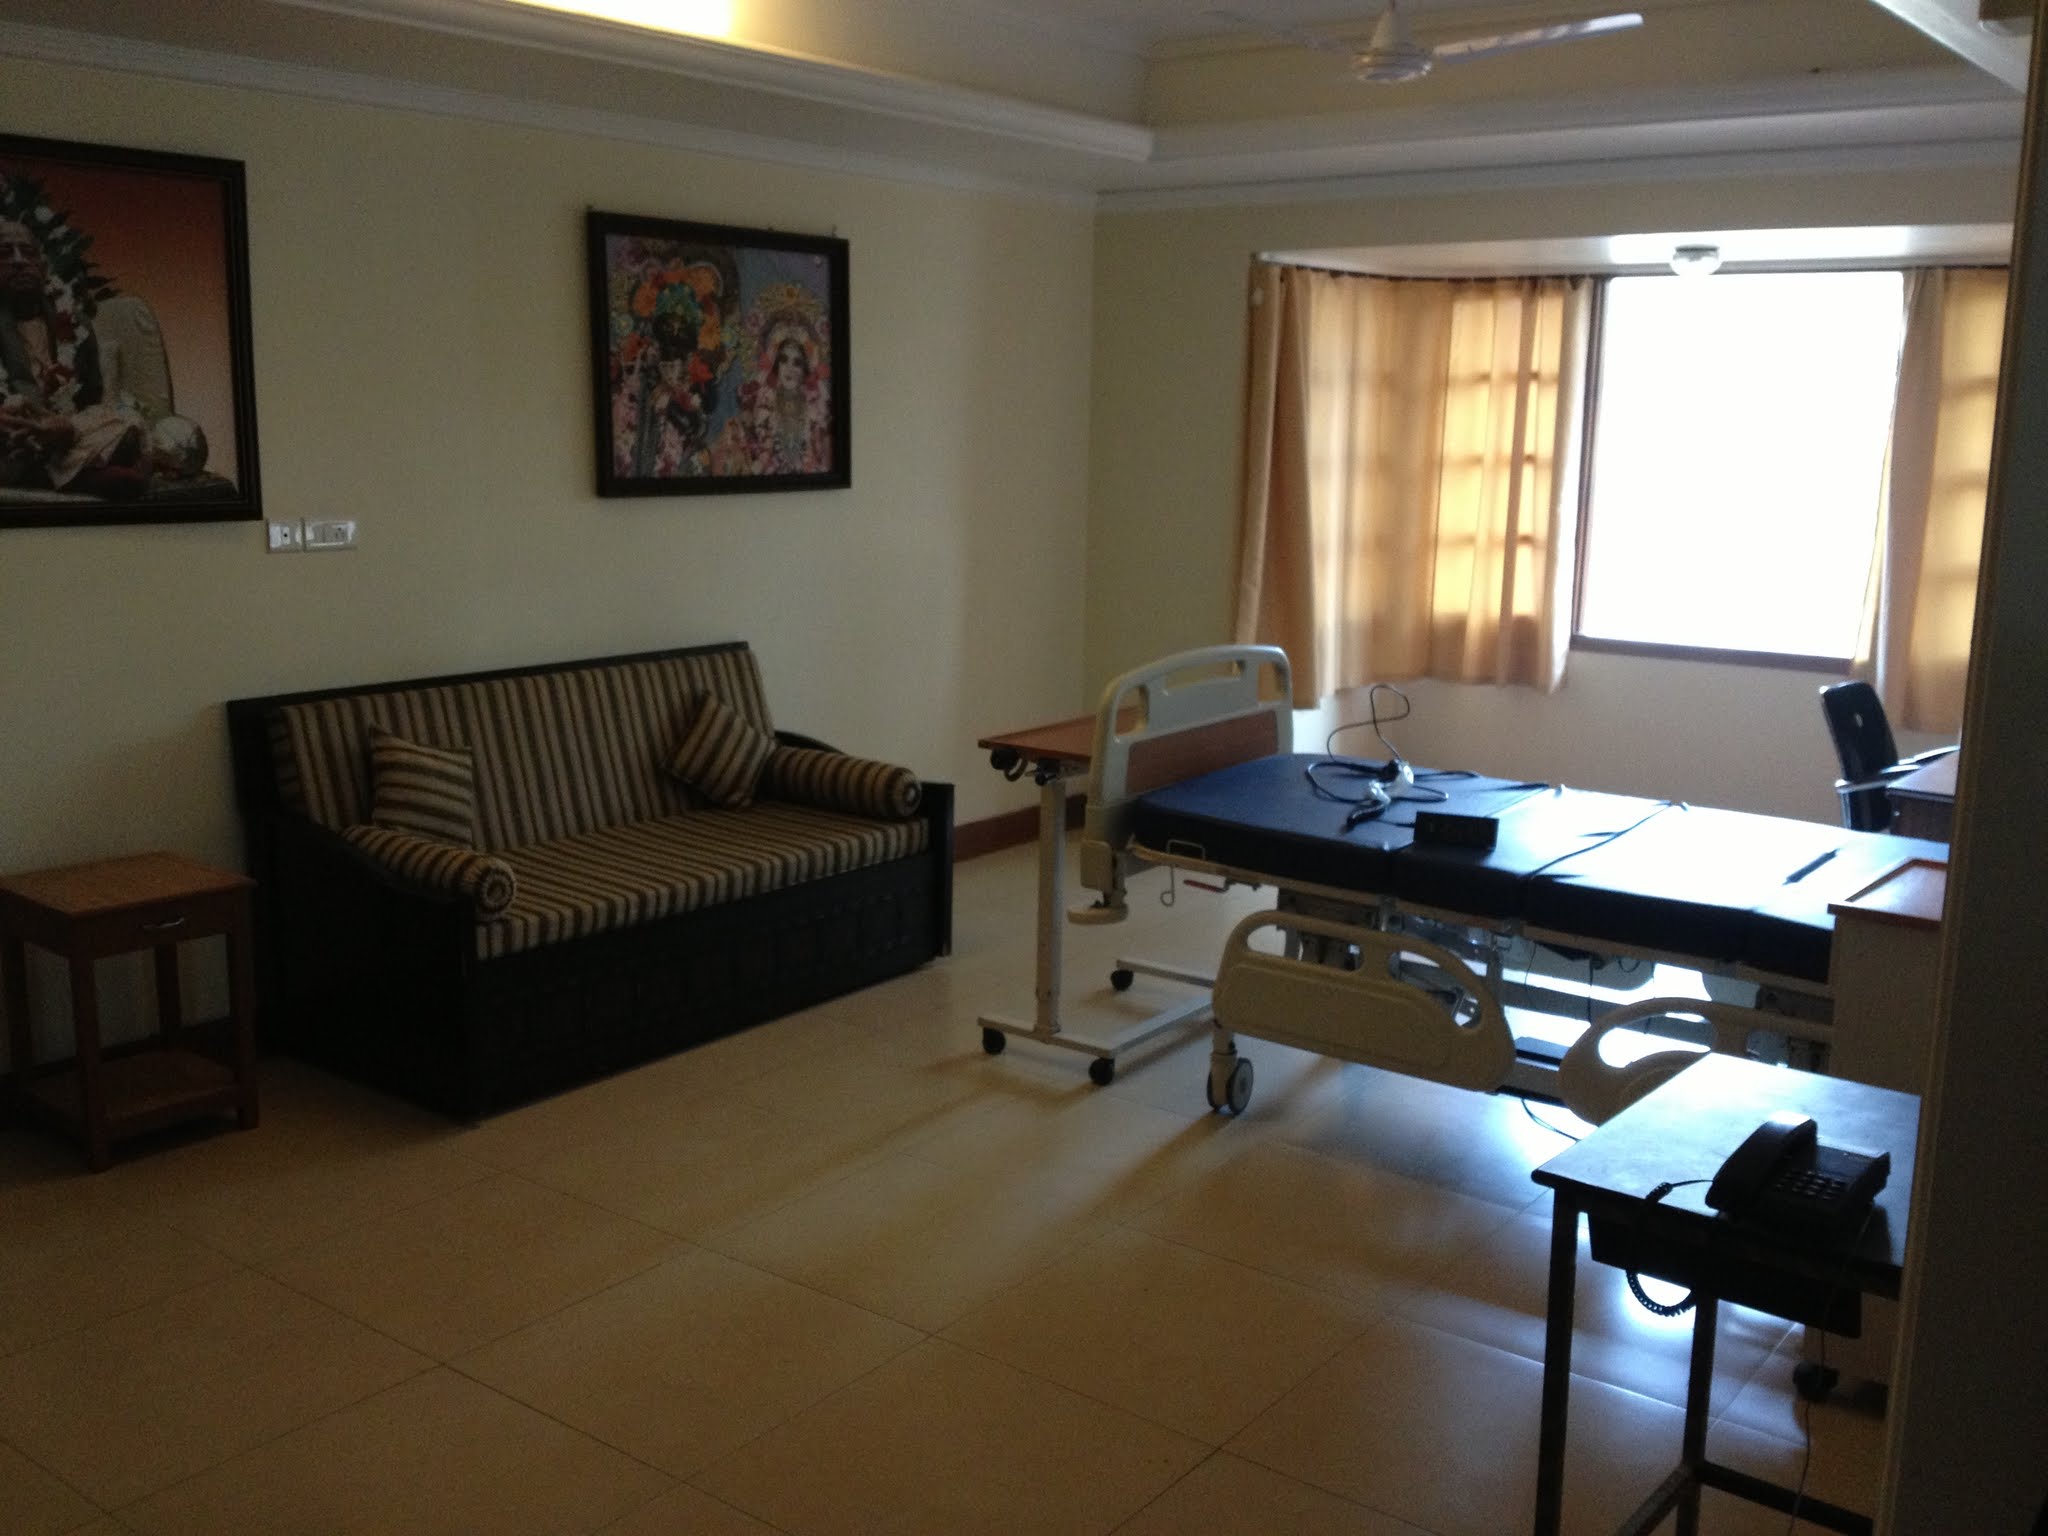 A private room at the Bhaktivedanta Hospice